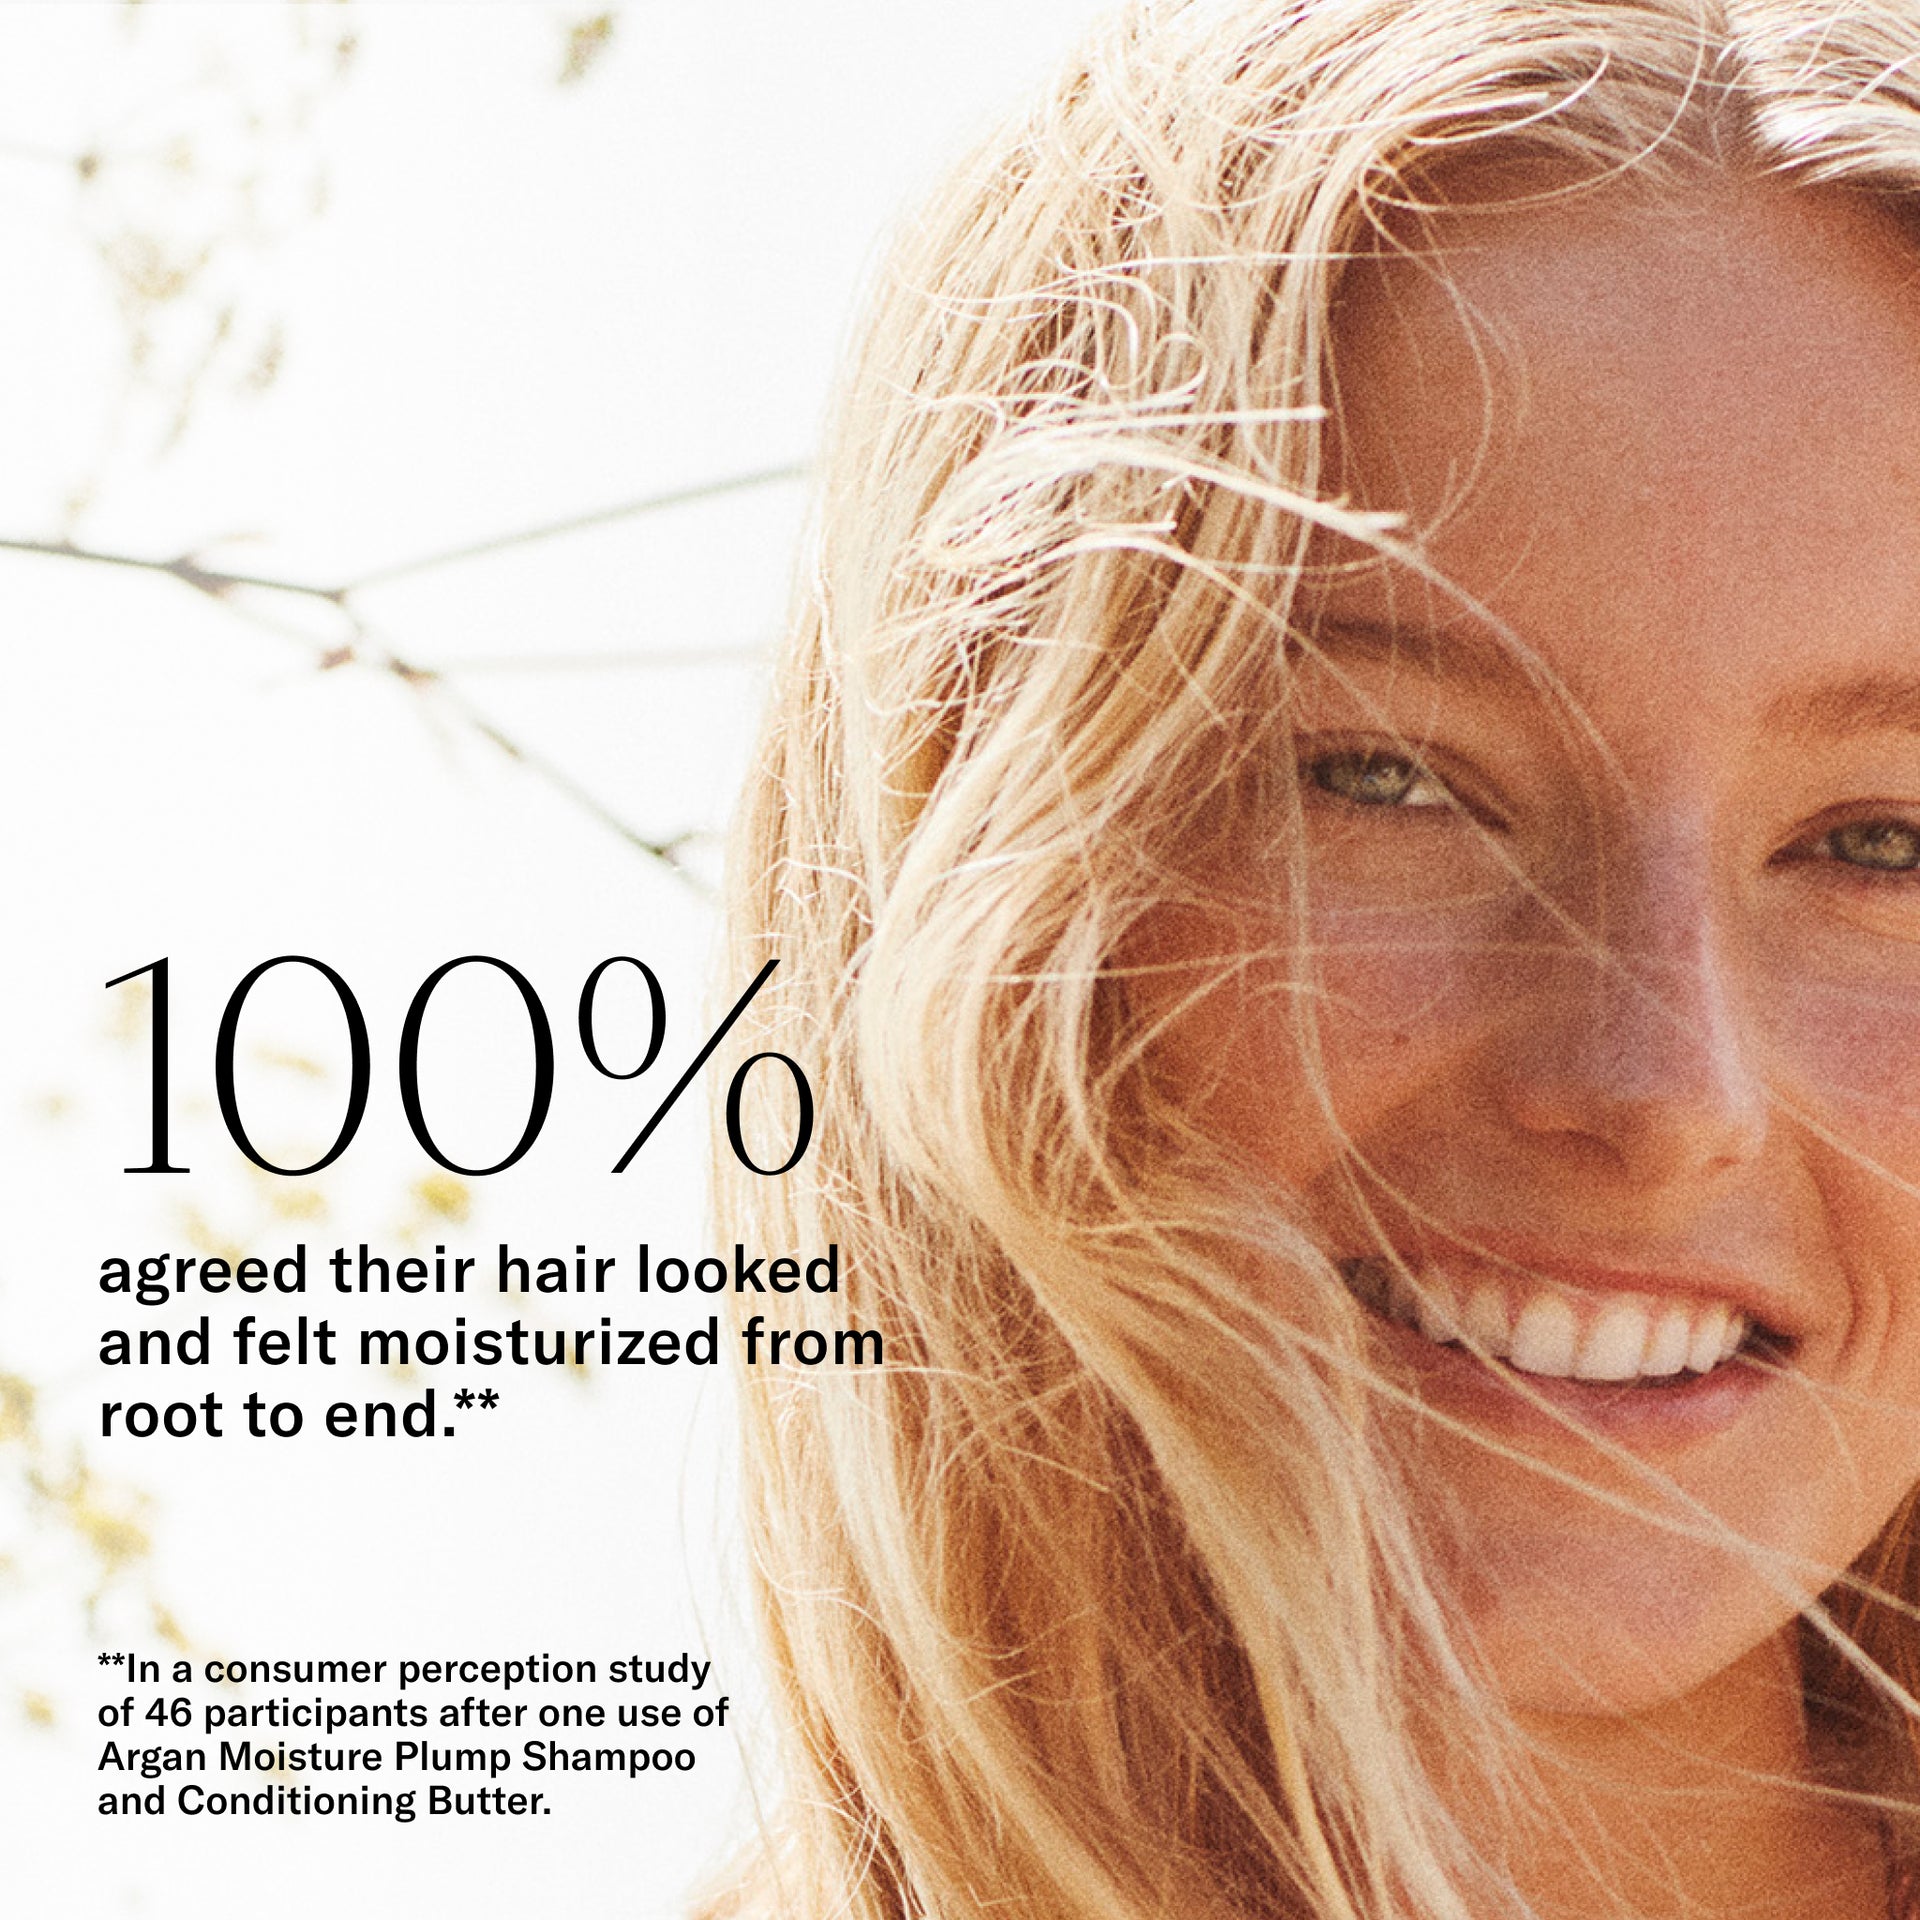 100% agreed their hair looked and felt moisturized from root to end.**